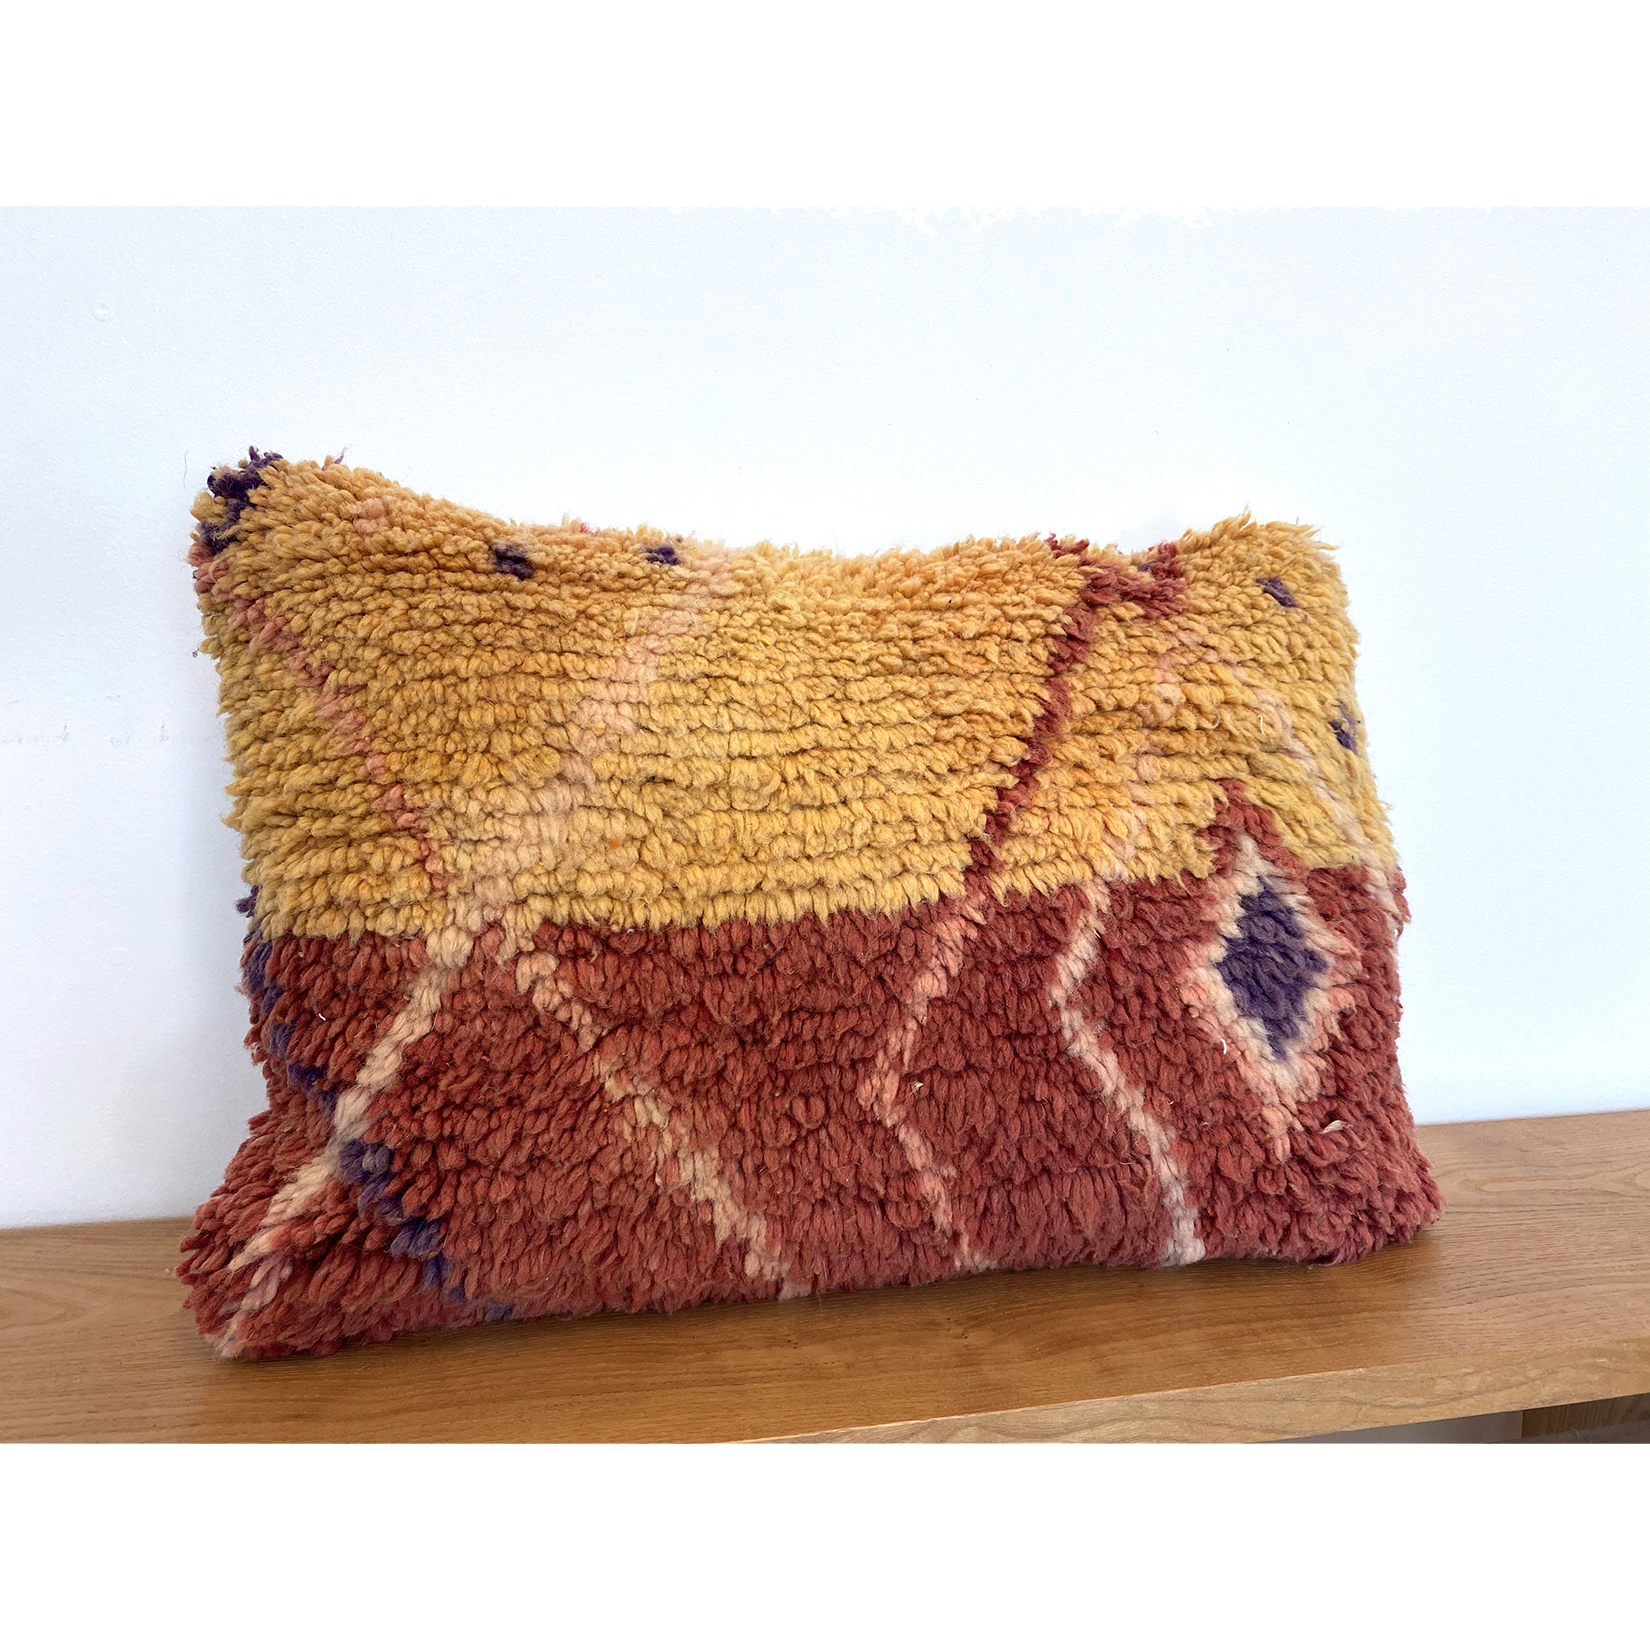 Red & yellow Moroccan throw pillow with purple diamond motif